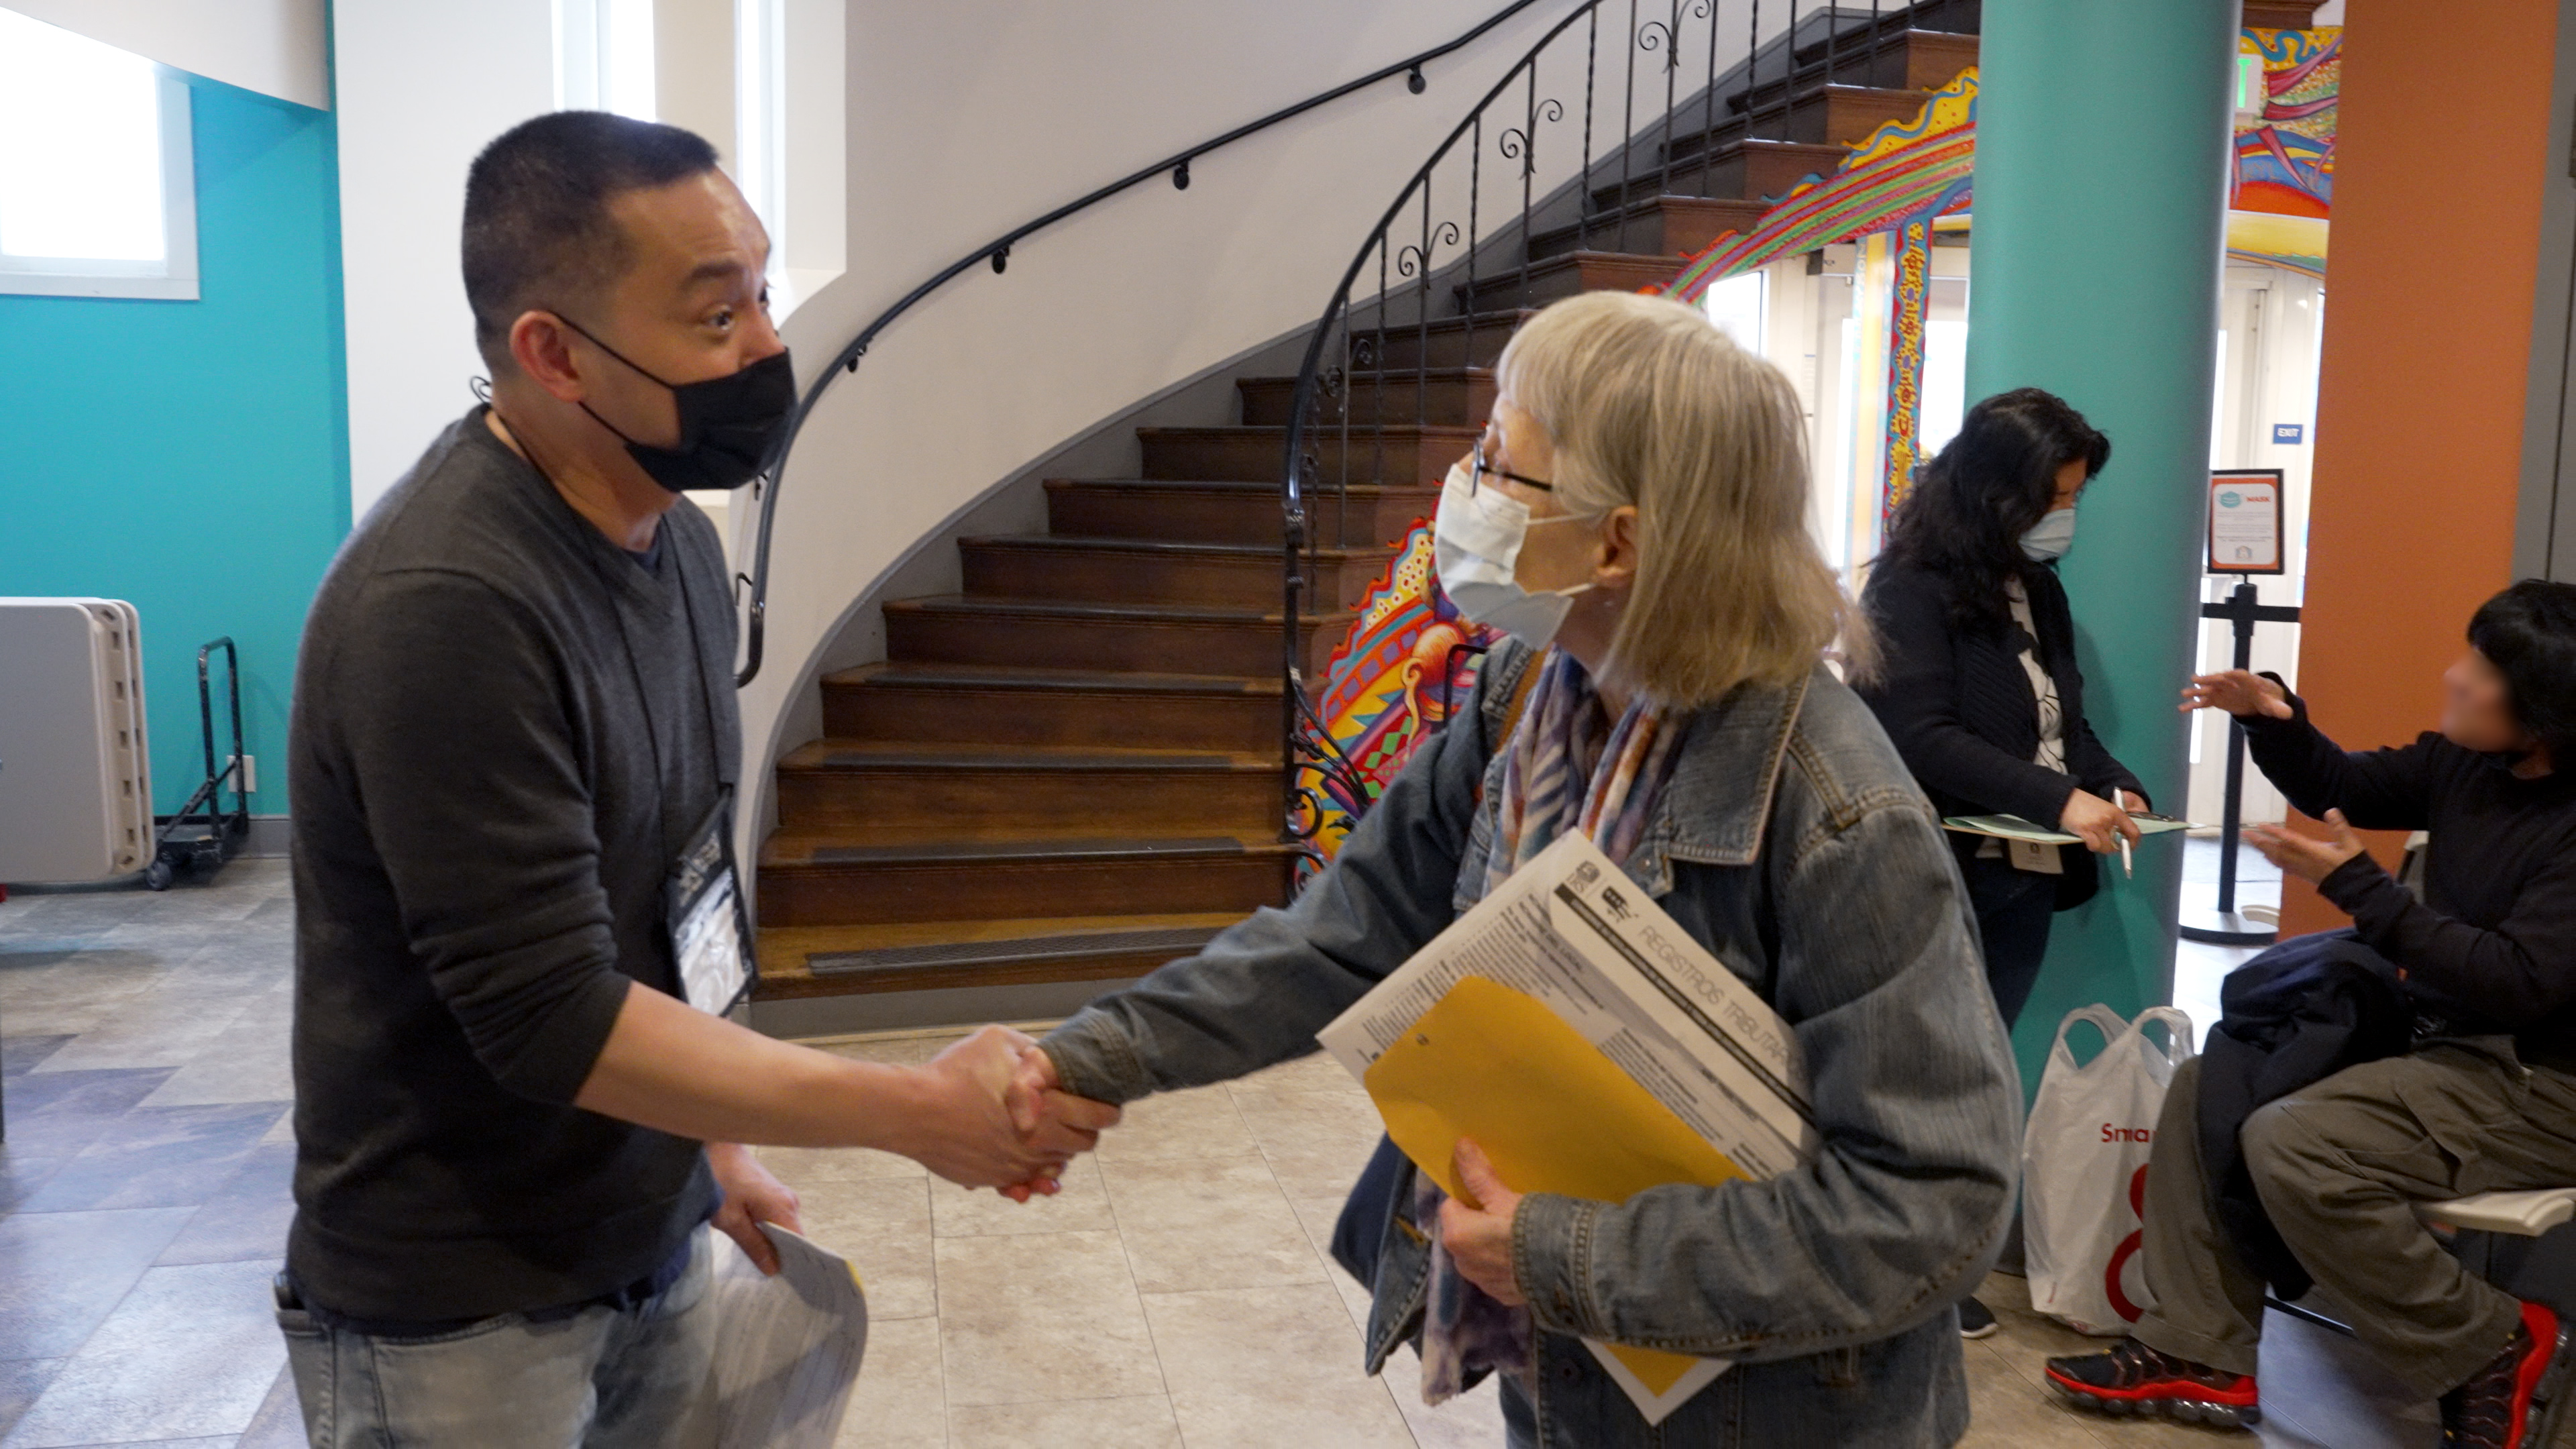 Volunteer Tax Preparer shaking hands with Free Tax Help program participant